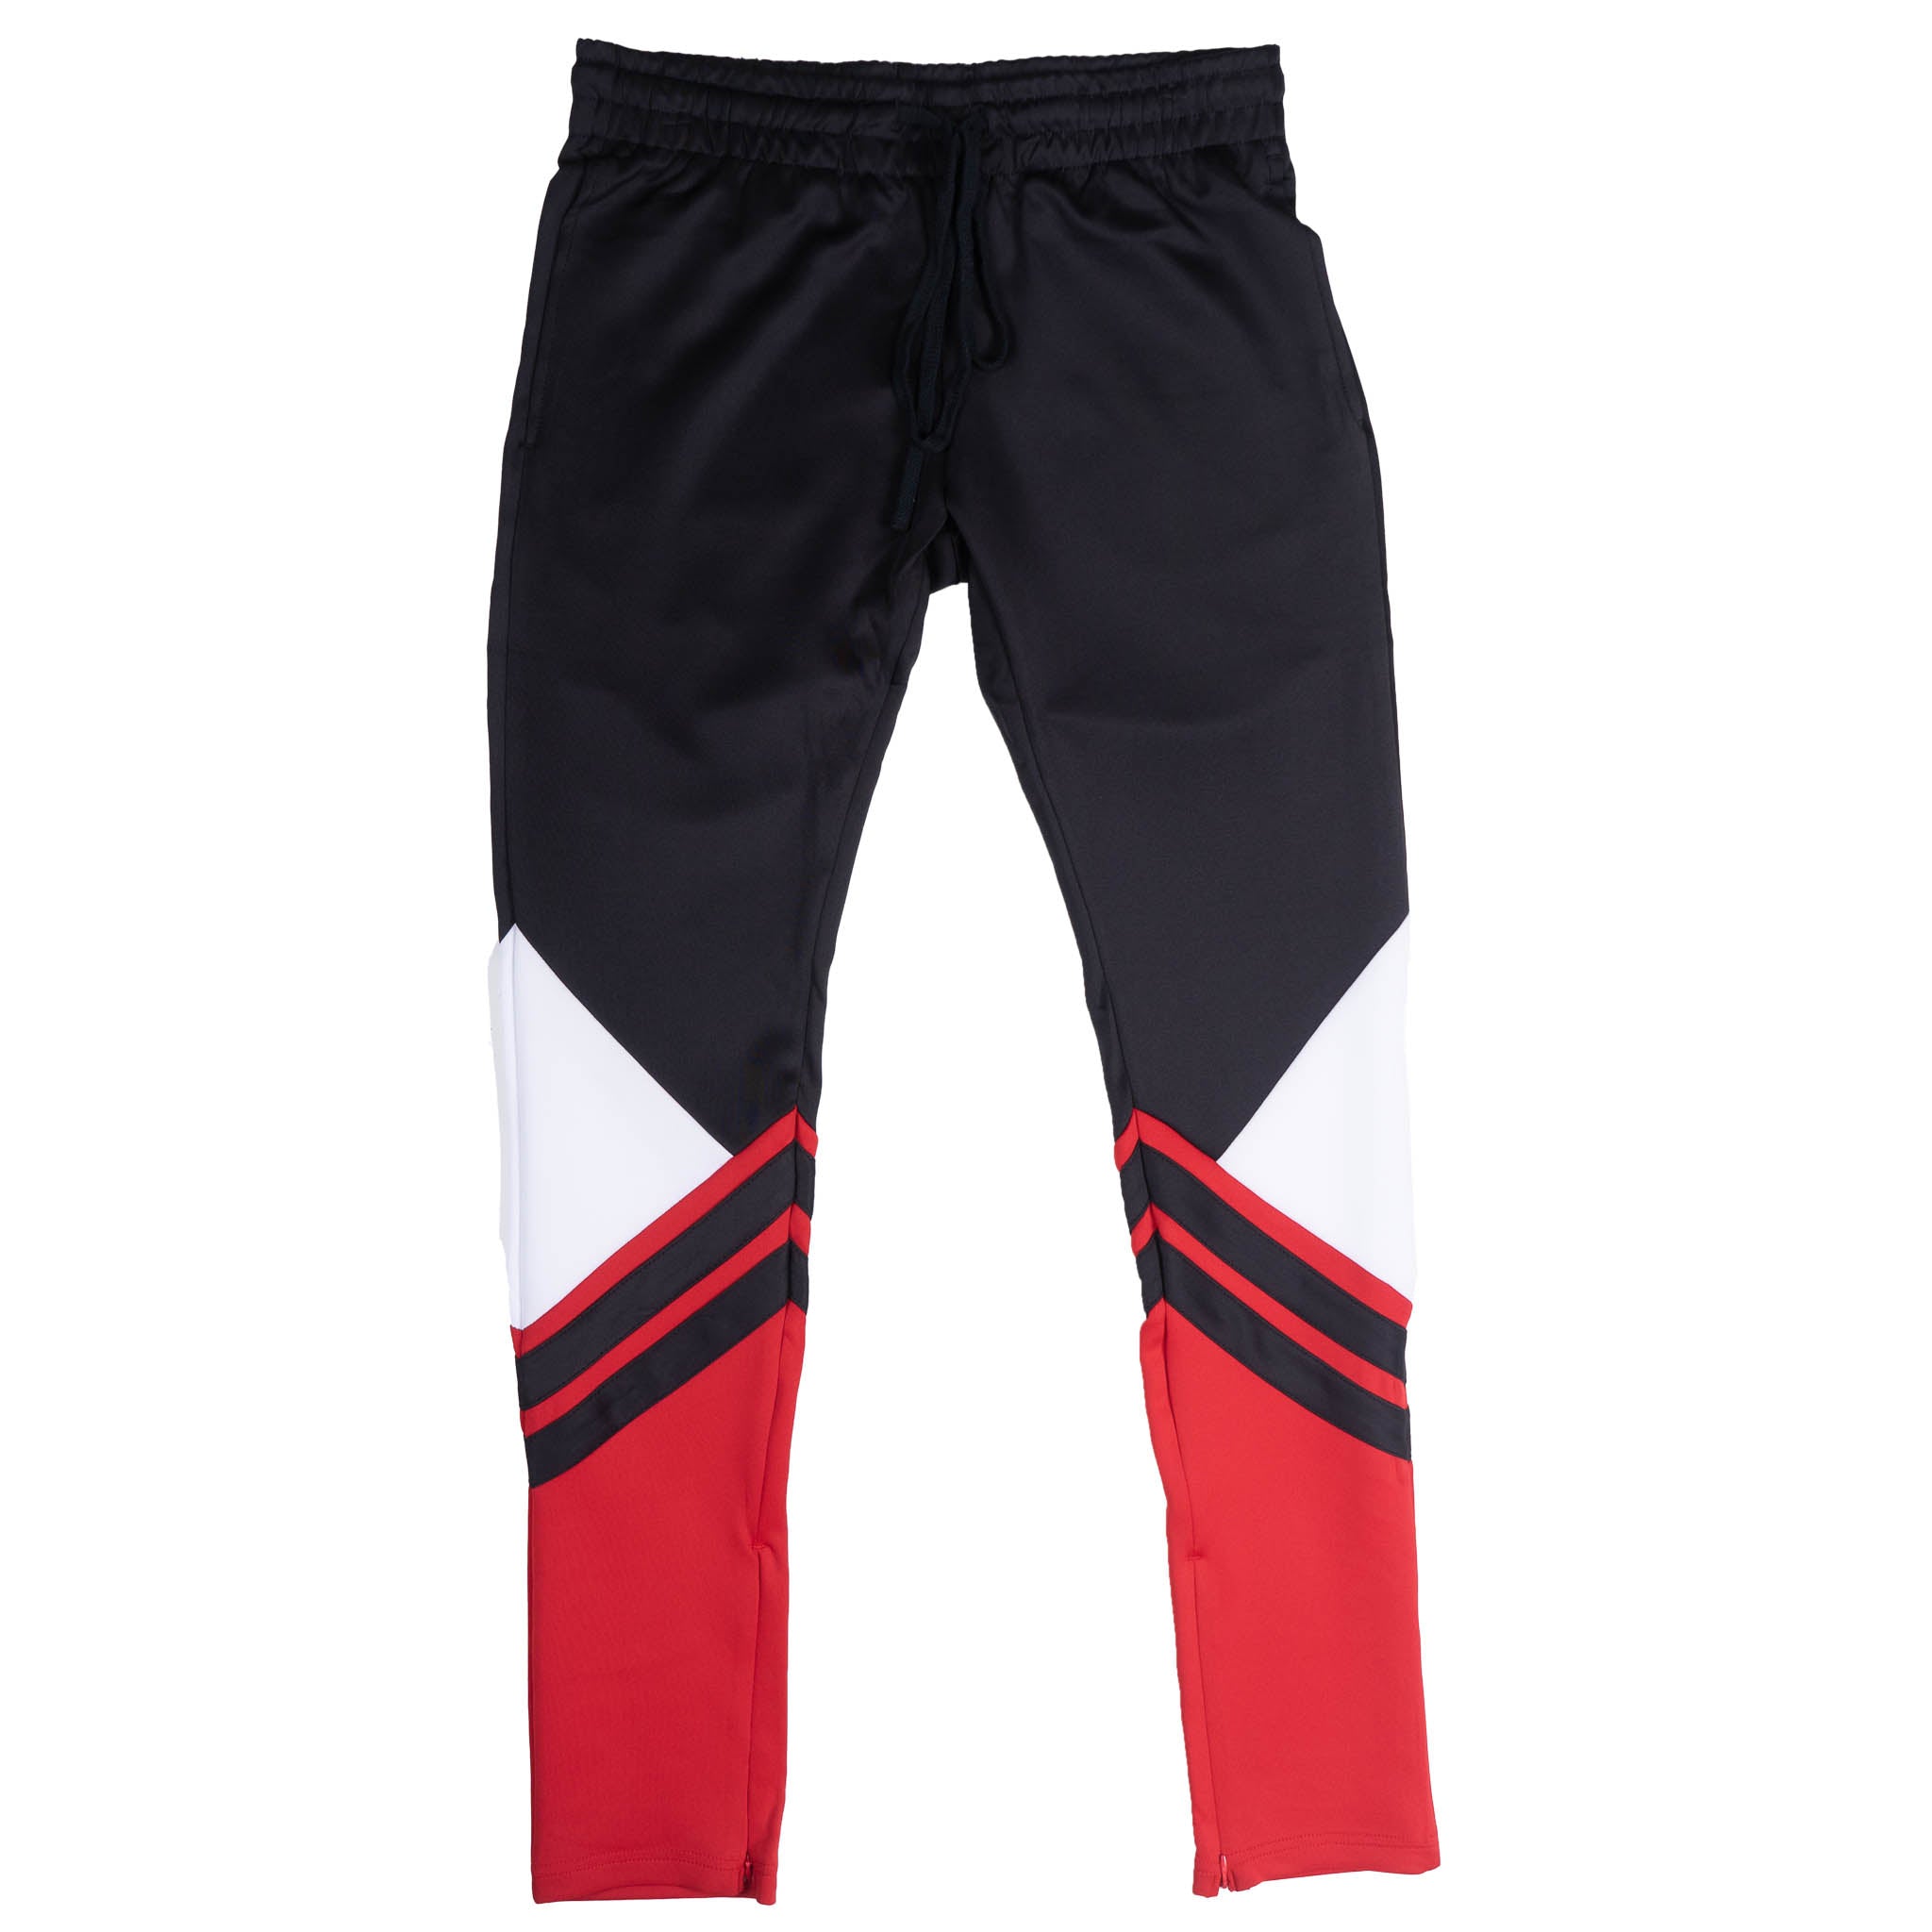 12 AM NATION COLOR BLOCK TRACK PANTS BLACK/WHITE/RED - 89213